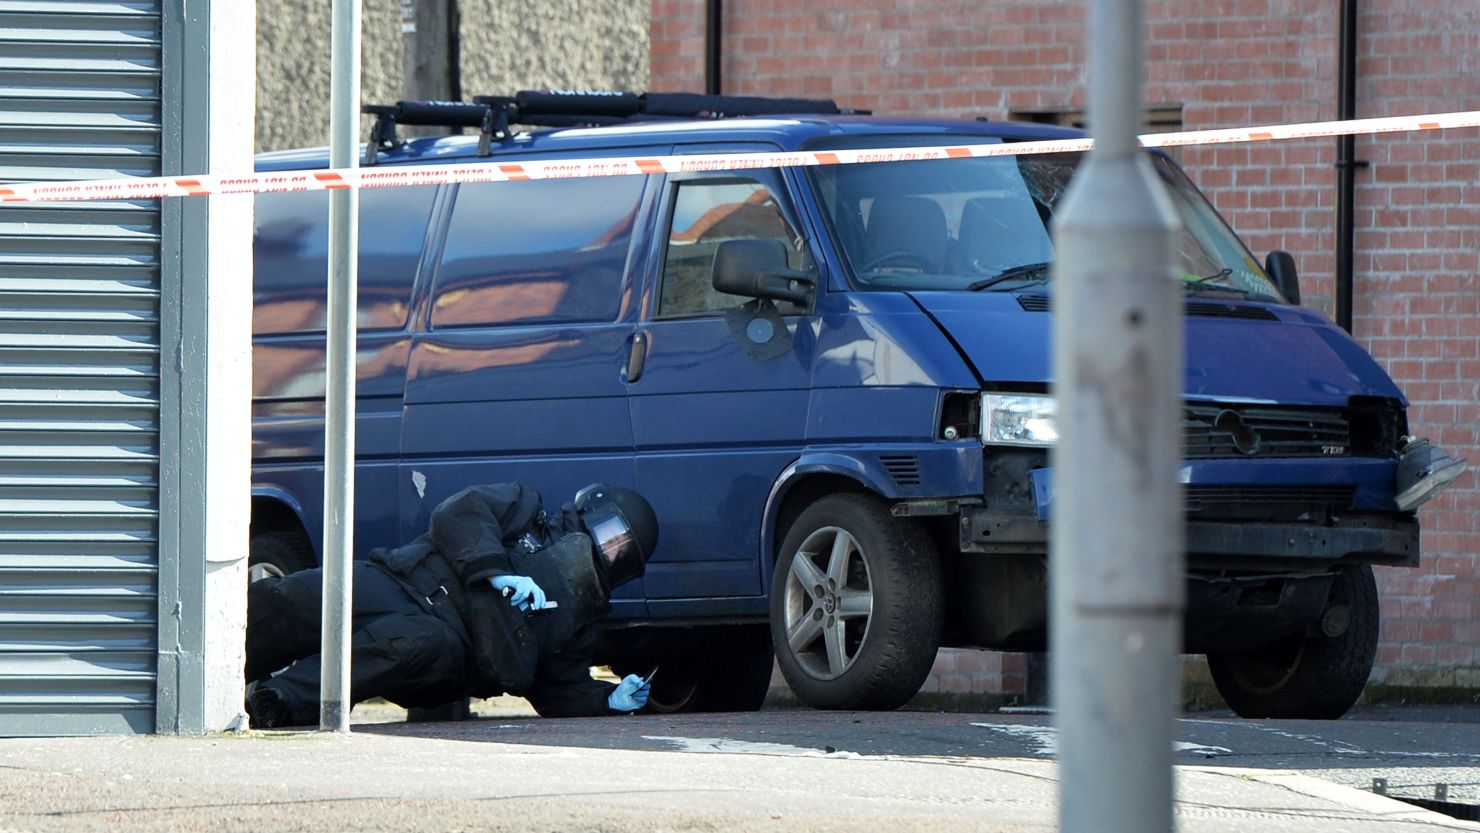 A bomb squad member inspects the prison officer's van on March 4 in east Belfast.